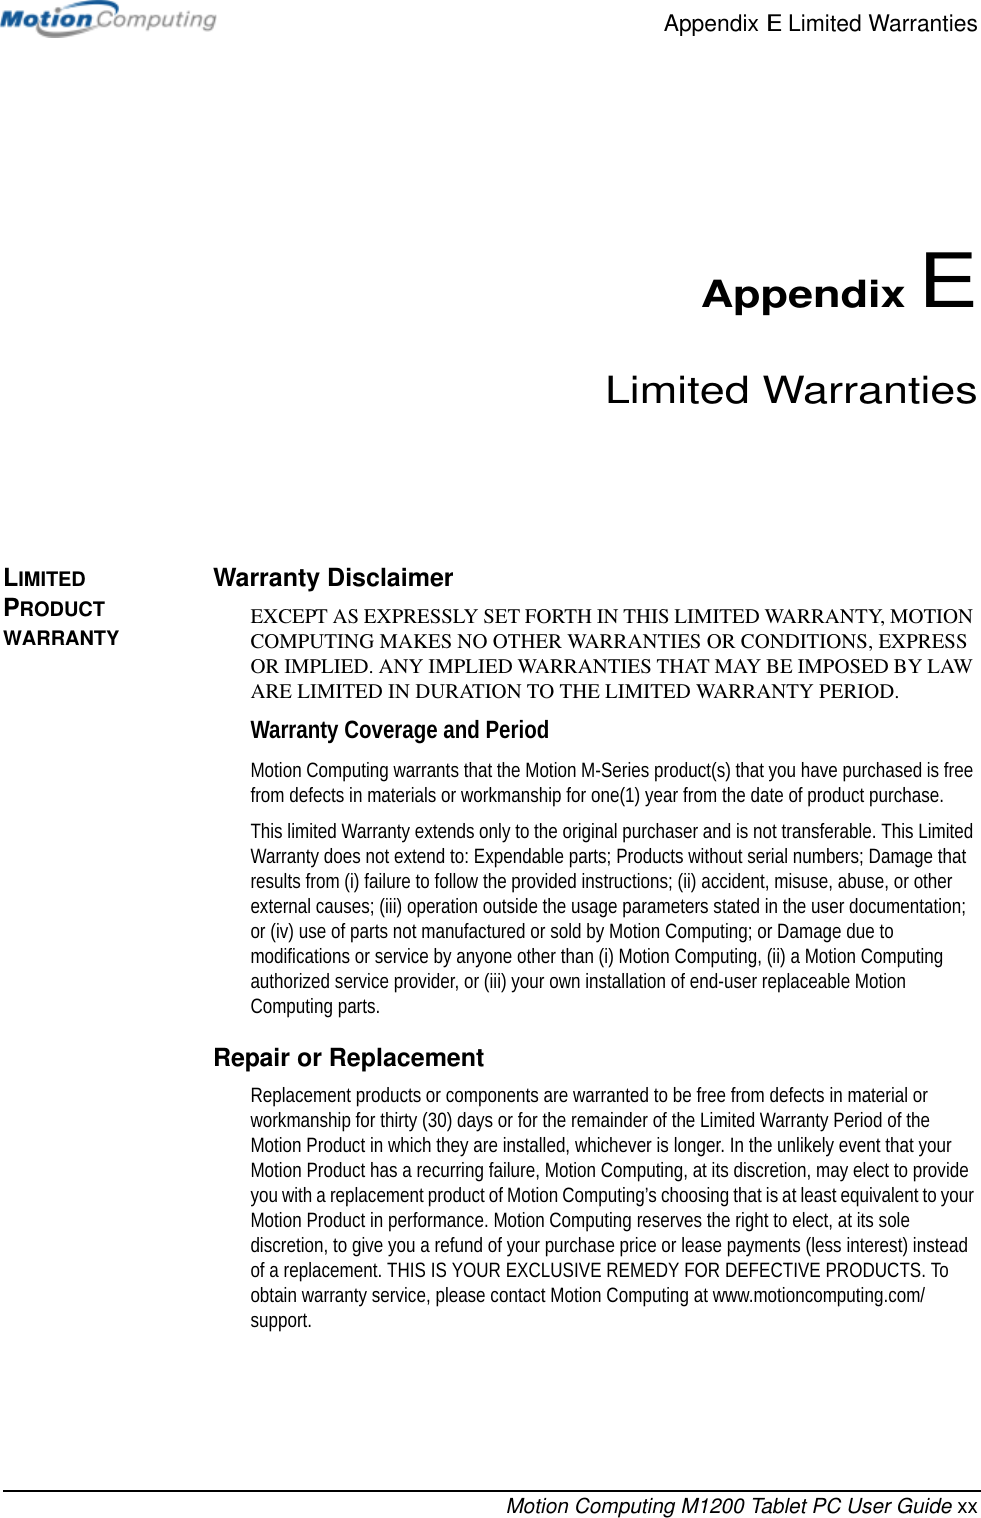 Appendix E Limited WarrantiesMotion Computing M1200 Tablet PC User Guide xxAppendix ELimited WarrantiesLIMITED PRODUCT WARRANTYWarranty DisclaimerEXCEPT AS EXPRESSLY SET FORTH IN THIS LIMITED WARRANTY, MOTION COMPUTING MAKES NO OTHER WARRANTIES OR CONDITIONS, EXPRESS OR IMPLIED. ANY IMPLIED WARRANTIES THAT MAY BE IMPOSED BY LAW ARE LIMITED IN DURATION TO THE LIMITED WARRANTY PERIOD.Warranty Coverage and PeriodMotion Computing warrants that the Motion M-Series product(s) that you have purchased is free from defects in materials or workmanship for one(1) year from the date of product purchase. This limited Warranty extends only to the original purchaser and is not transferable. This Limited Warranty does not extend to: Expendable parts; Products without serial numbers; Damage that results from (i) failure to follow the provided instructions; (ii) accident, misuse, abuse, or other external causes; (iii) operation outside the usage parameters stated in the user documentation; or (iv) use of parts not manufactured or sold by Motion Computing; or Damage due to modifications or service by anyone other than (i) Motion Computing, (ii) a Motion Computing authorized service provider, or (iii) your own installation of end-user replaceable Motion Computing parts.Repair or ReplacementReplacement products or components are warranted to be free from defects in material or workmanship for thirty (30) days or for the remainder of the Limited Warranty Period of the Motion Product in which they are installed, whichever is longer. In the unlikely event that your Motion Product has a recurring failure, Motion Computing, at its discretion, may elect to provide you with a replacement product of Motion Computing’s choosing that is at least equivalent to your Motion Product in performance. Motion Computing reserves the right to elect, at its sole discretion, to give you a refund of your purchase price or lease payments (less interest) instead of a replacement. THIS IS YOUR EXCLUSIVE REMEDY FOR DEFECTIVE PRODUCTS. To obtain warranty service, please contact Motion Computing at www.motioncomputing.com/support.